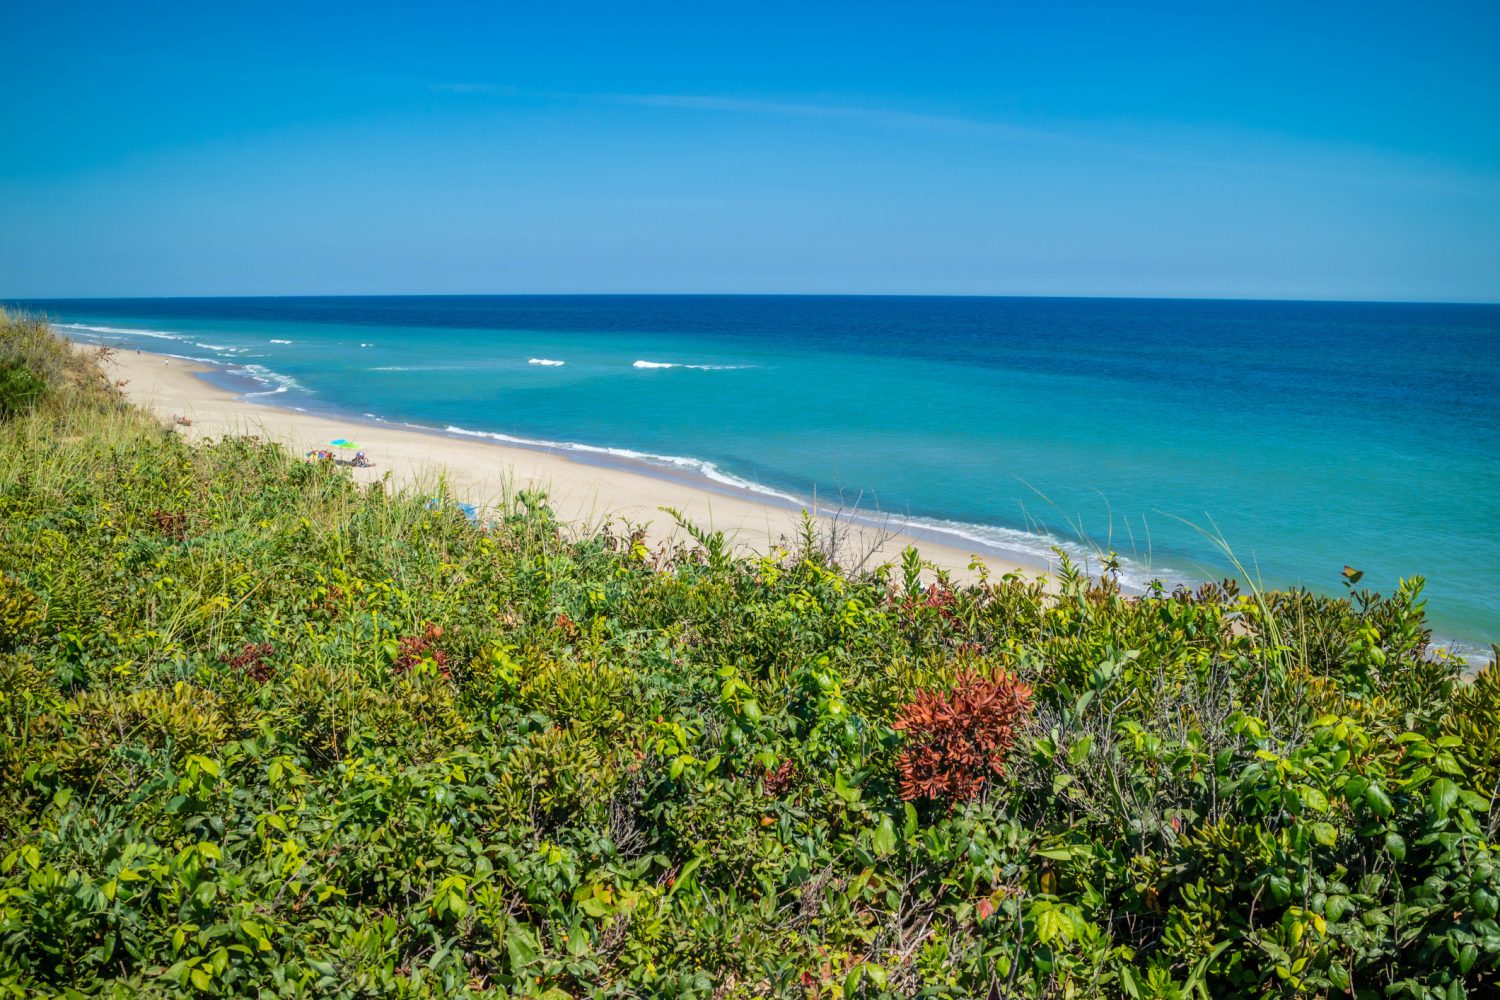 A hot and sunny weather along the shore of a beach with vegetation in the background.